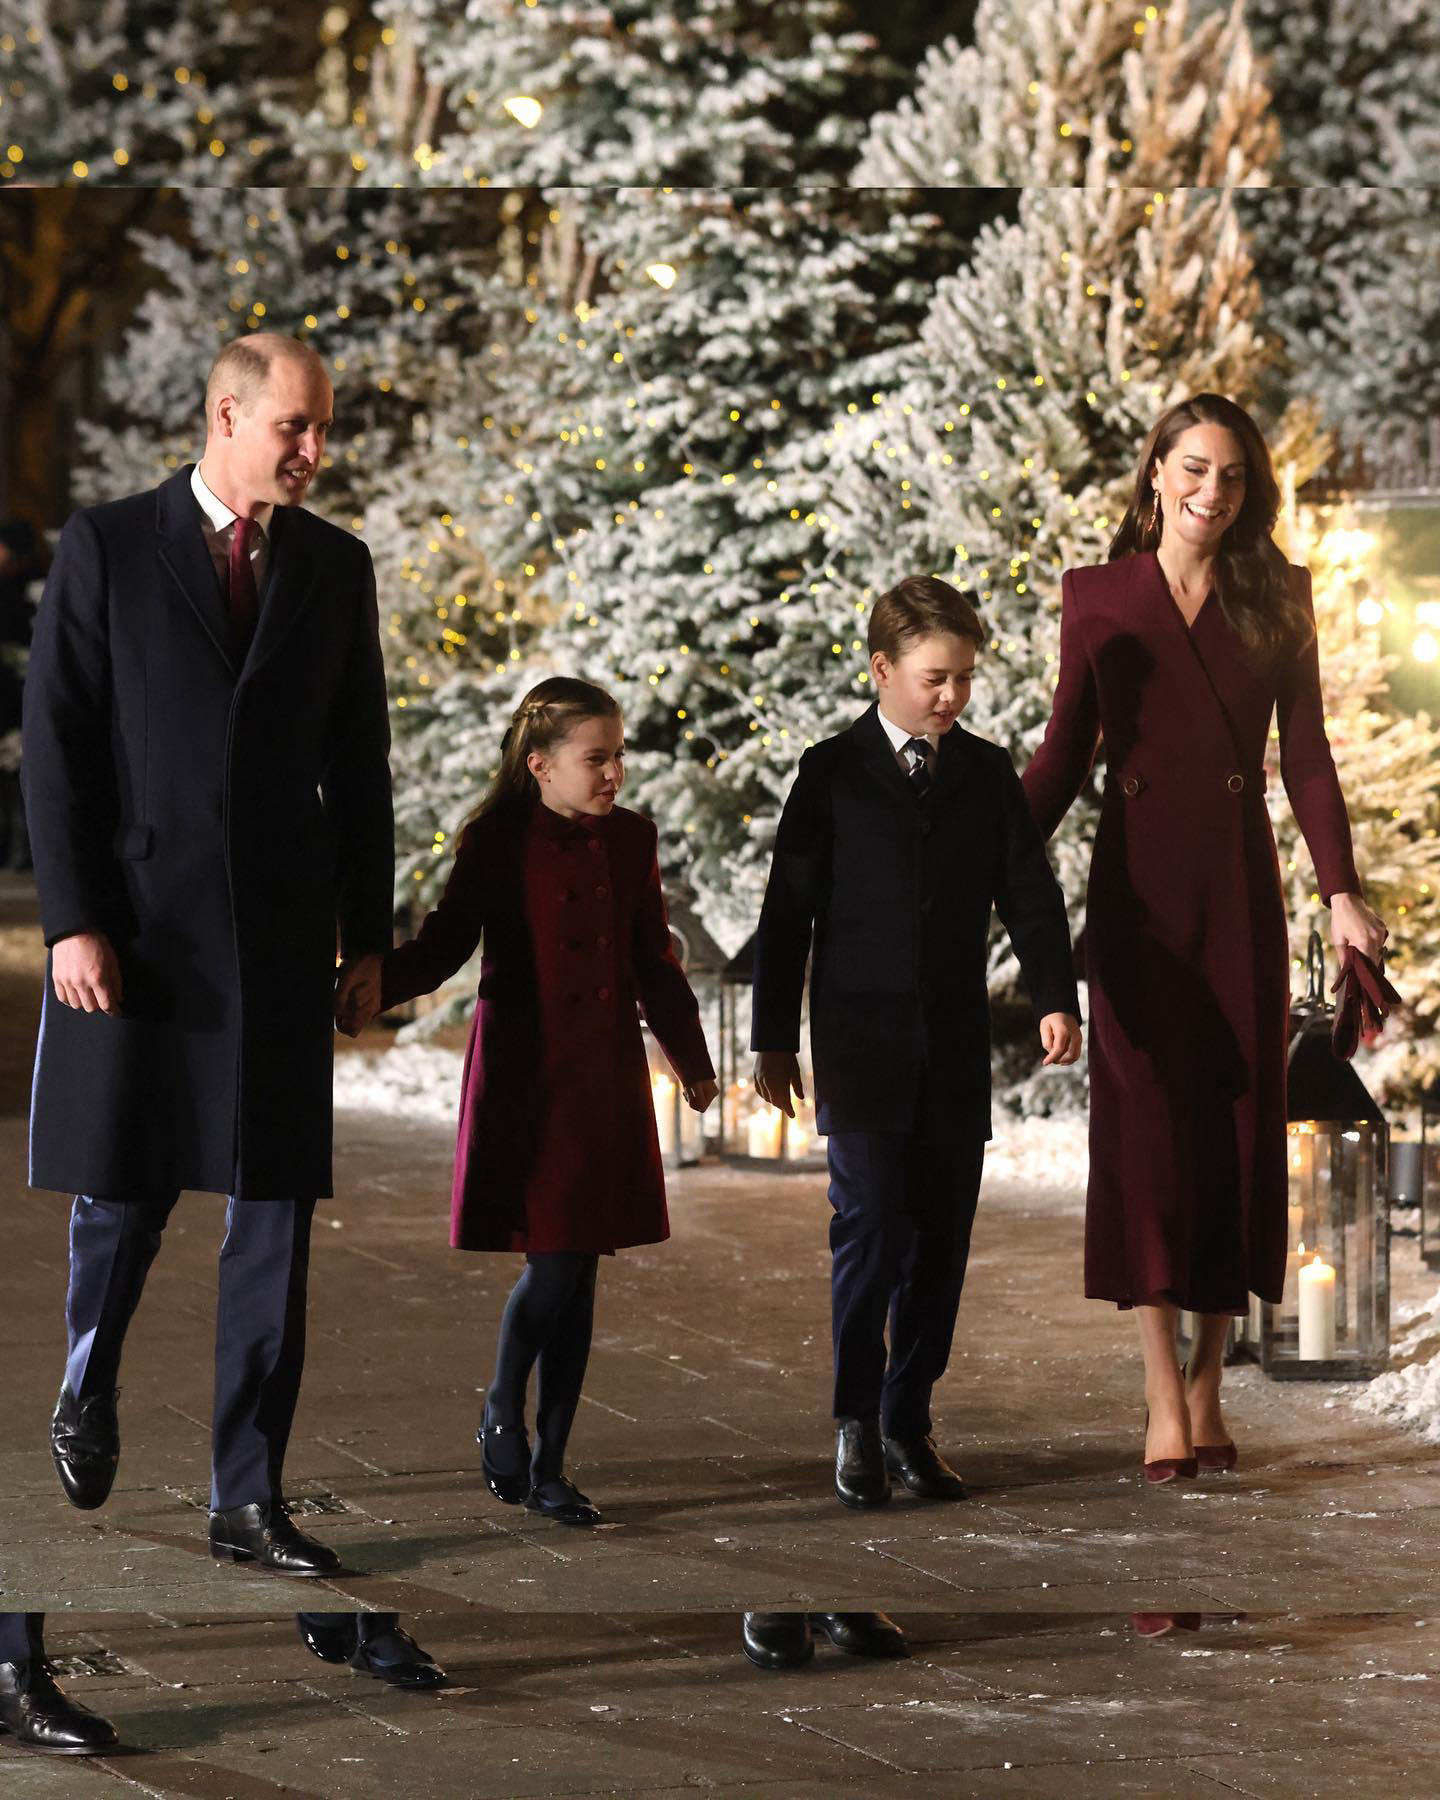 Just Jared - Members of the royal family, including Prince George and Princess Charlotte, showed up